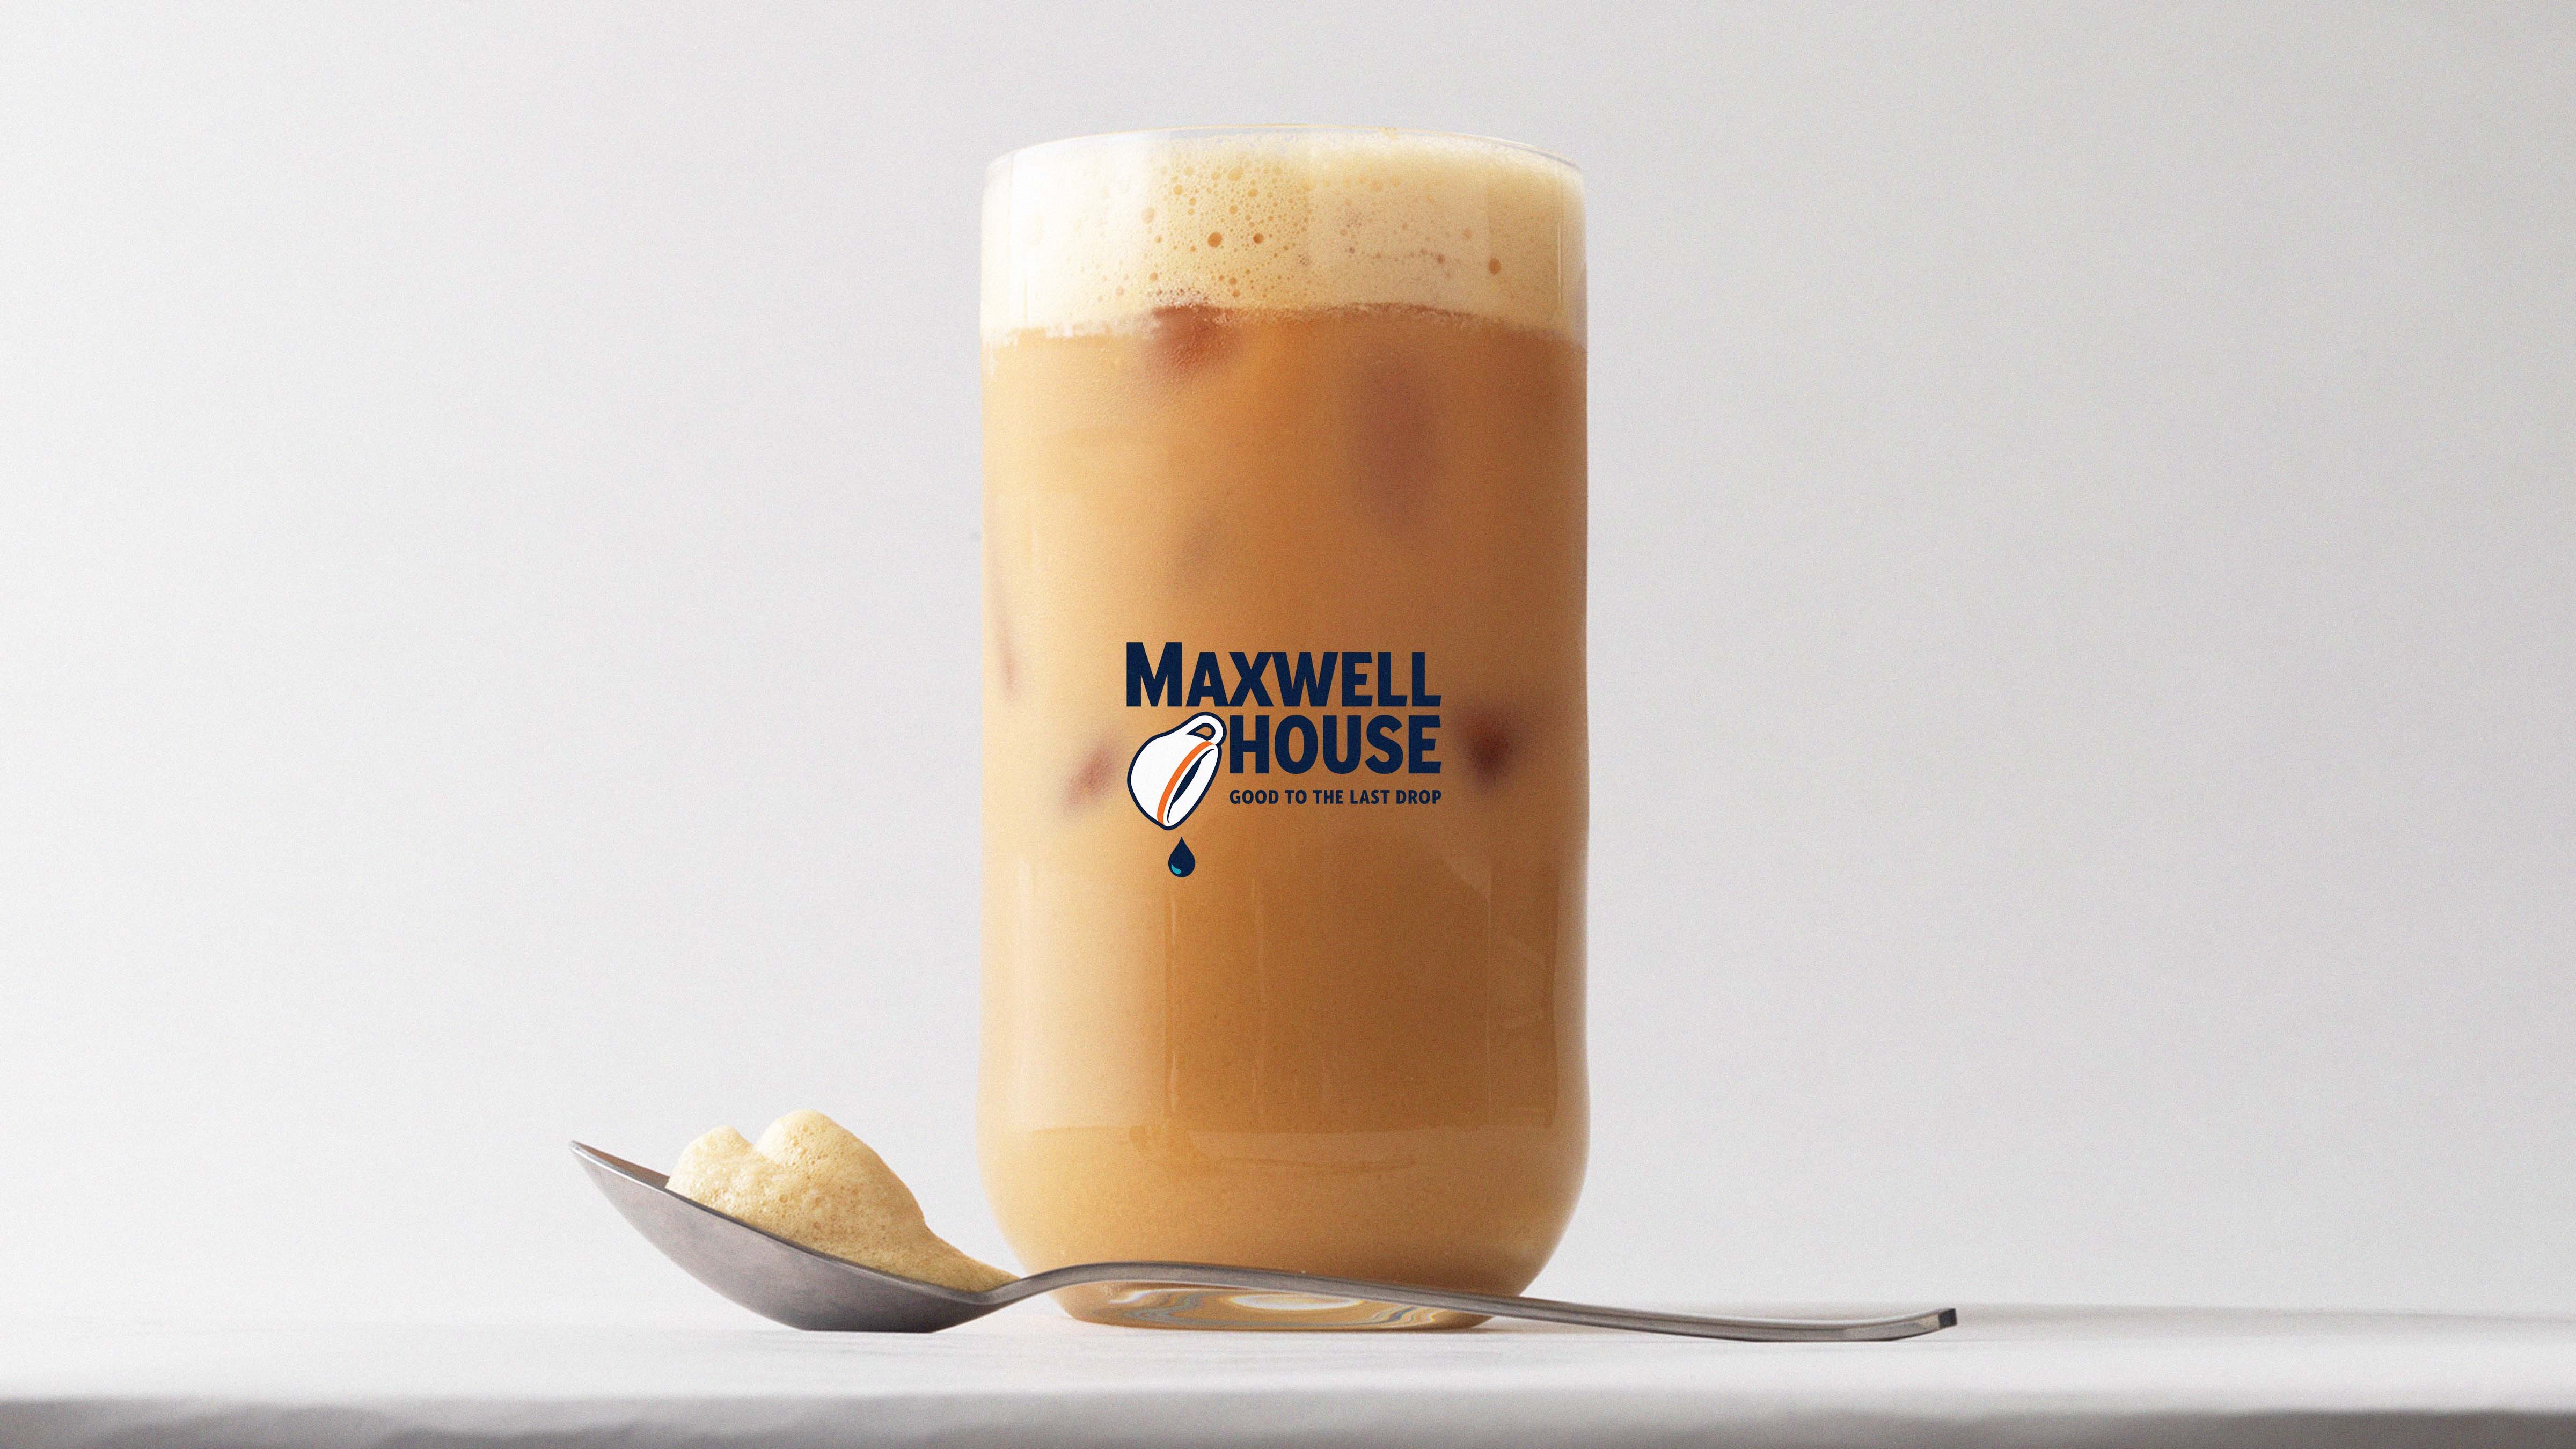 Why isn't Maxwell House more involved Downtown?